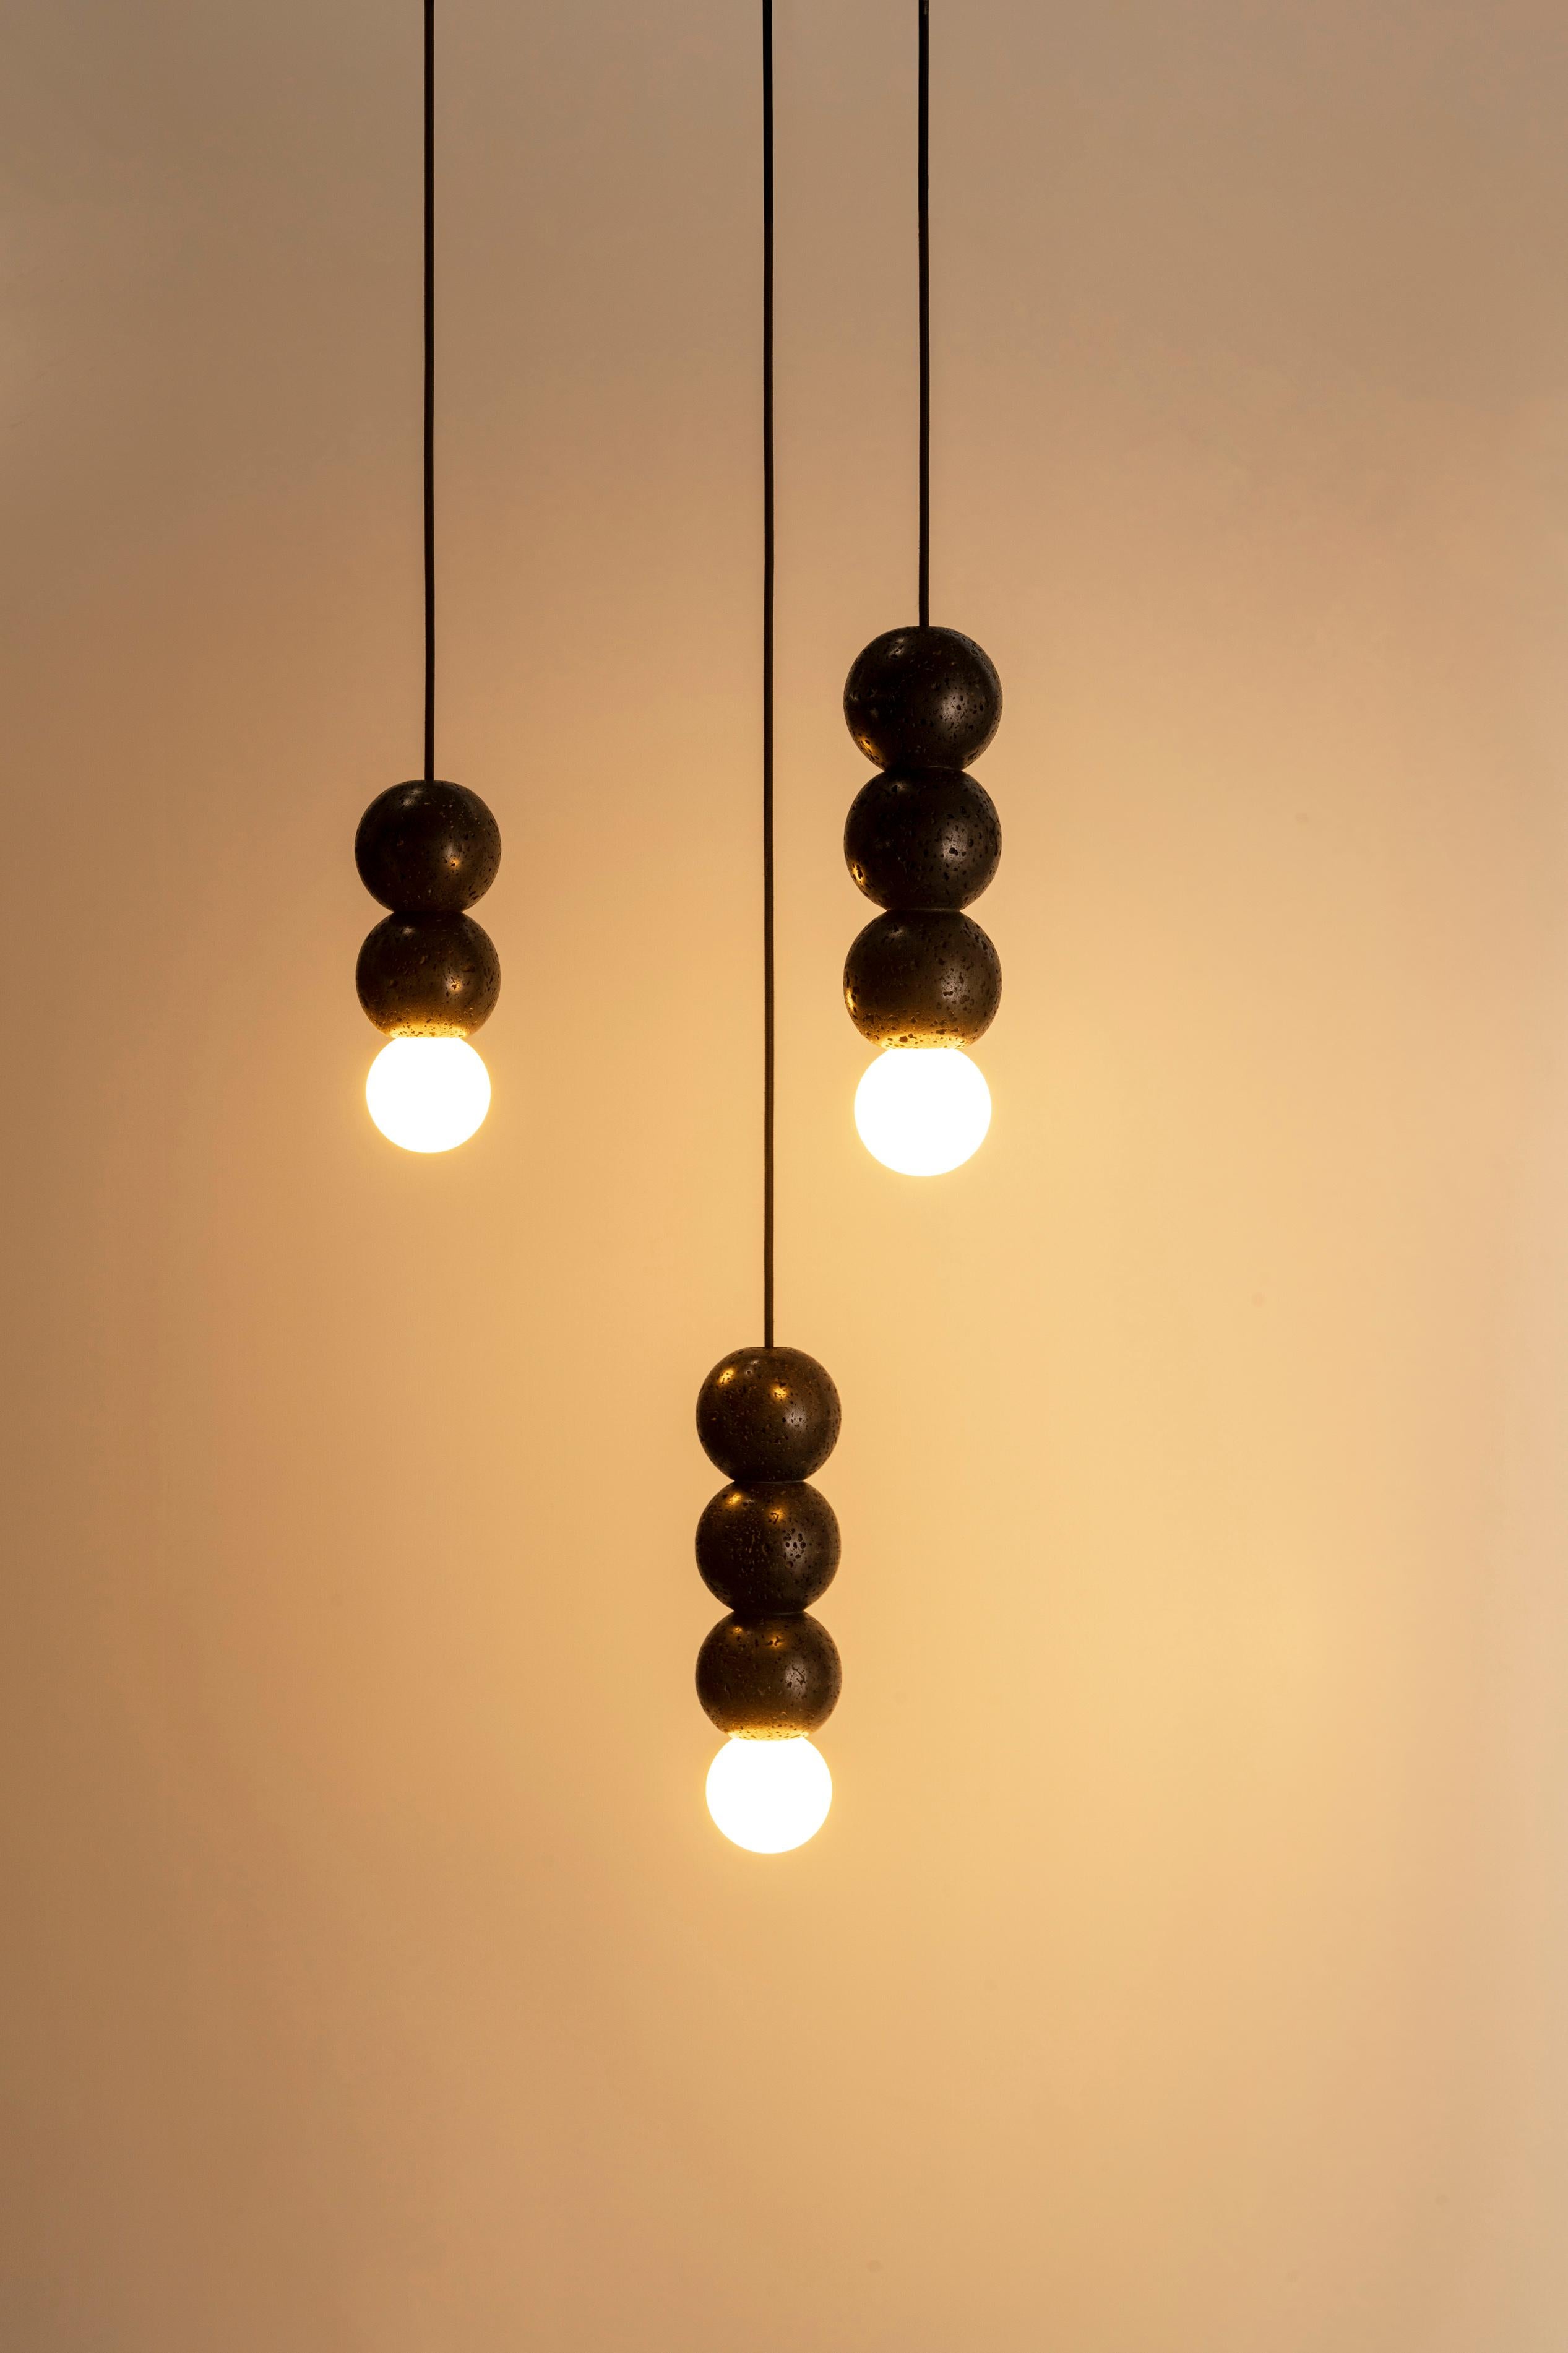 Chinese Lava Stone and Aluminum Pendant Light, “Ooops, ” by Buzao